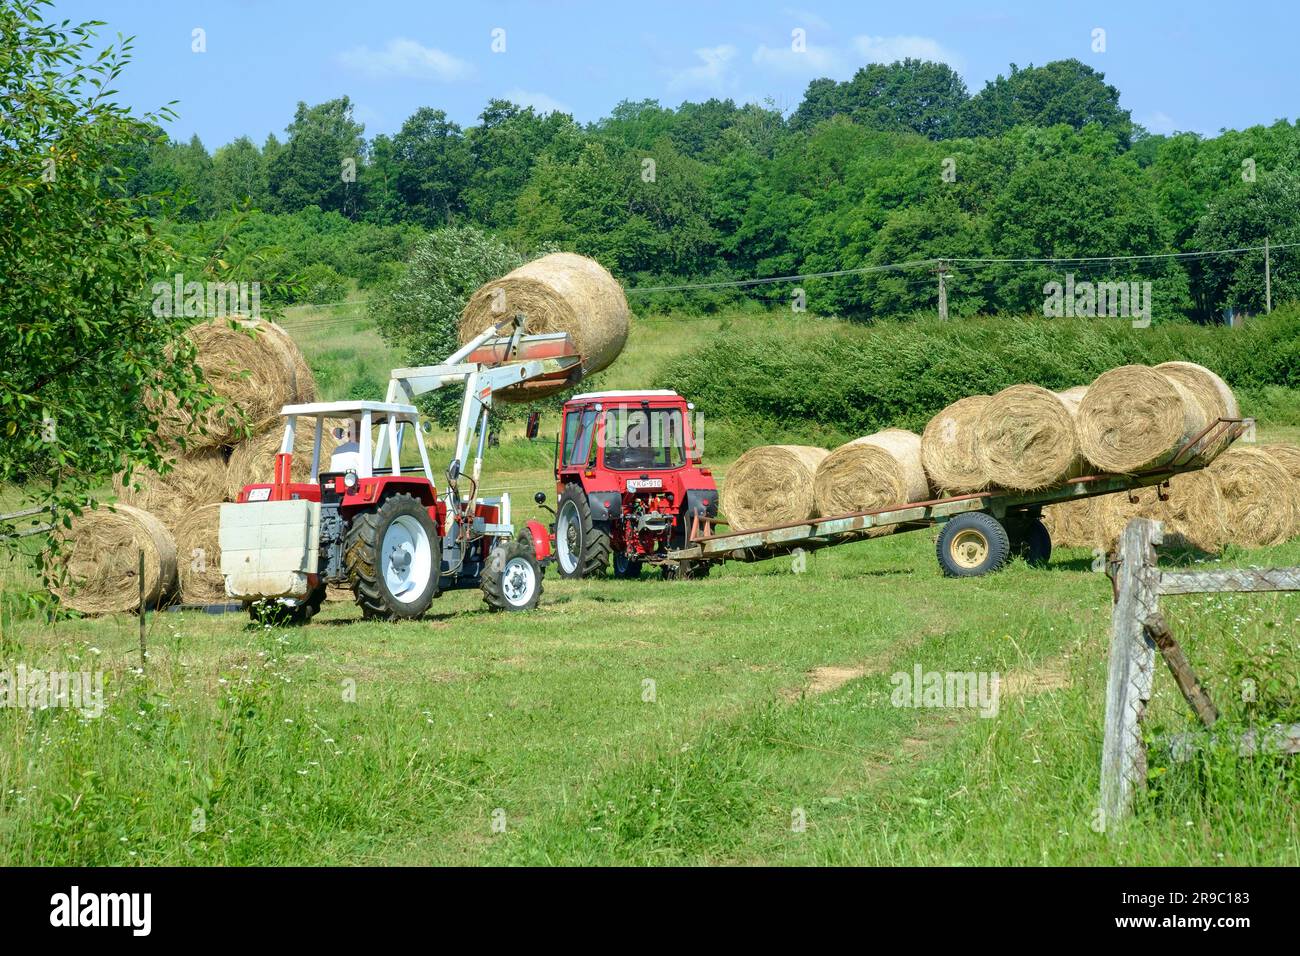 steyr 650 tractor being used to stack round hay bales unloaded from trailer after harvesting zala county hungary Stock Photo